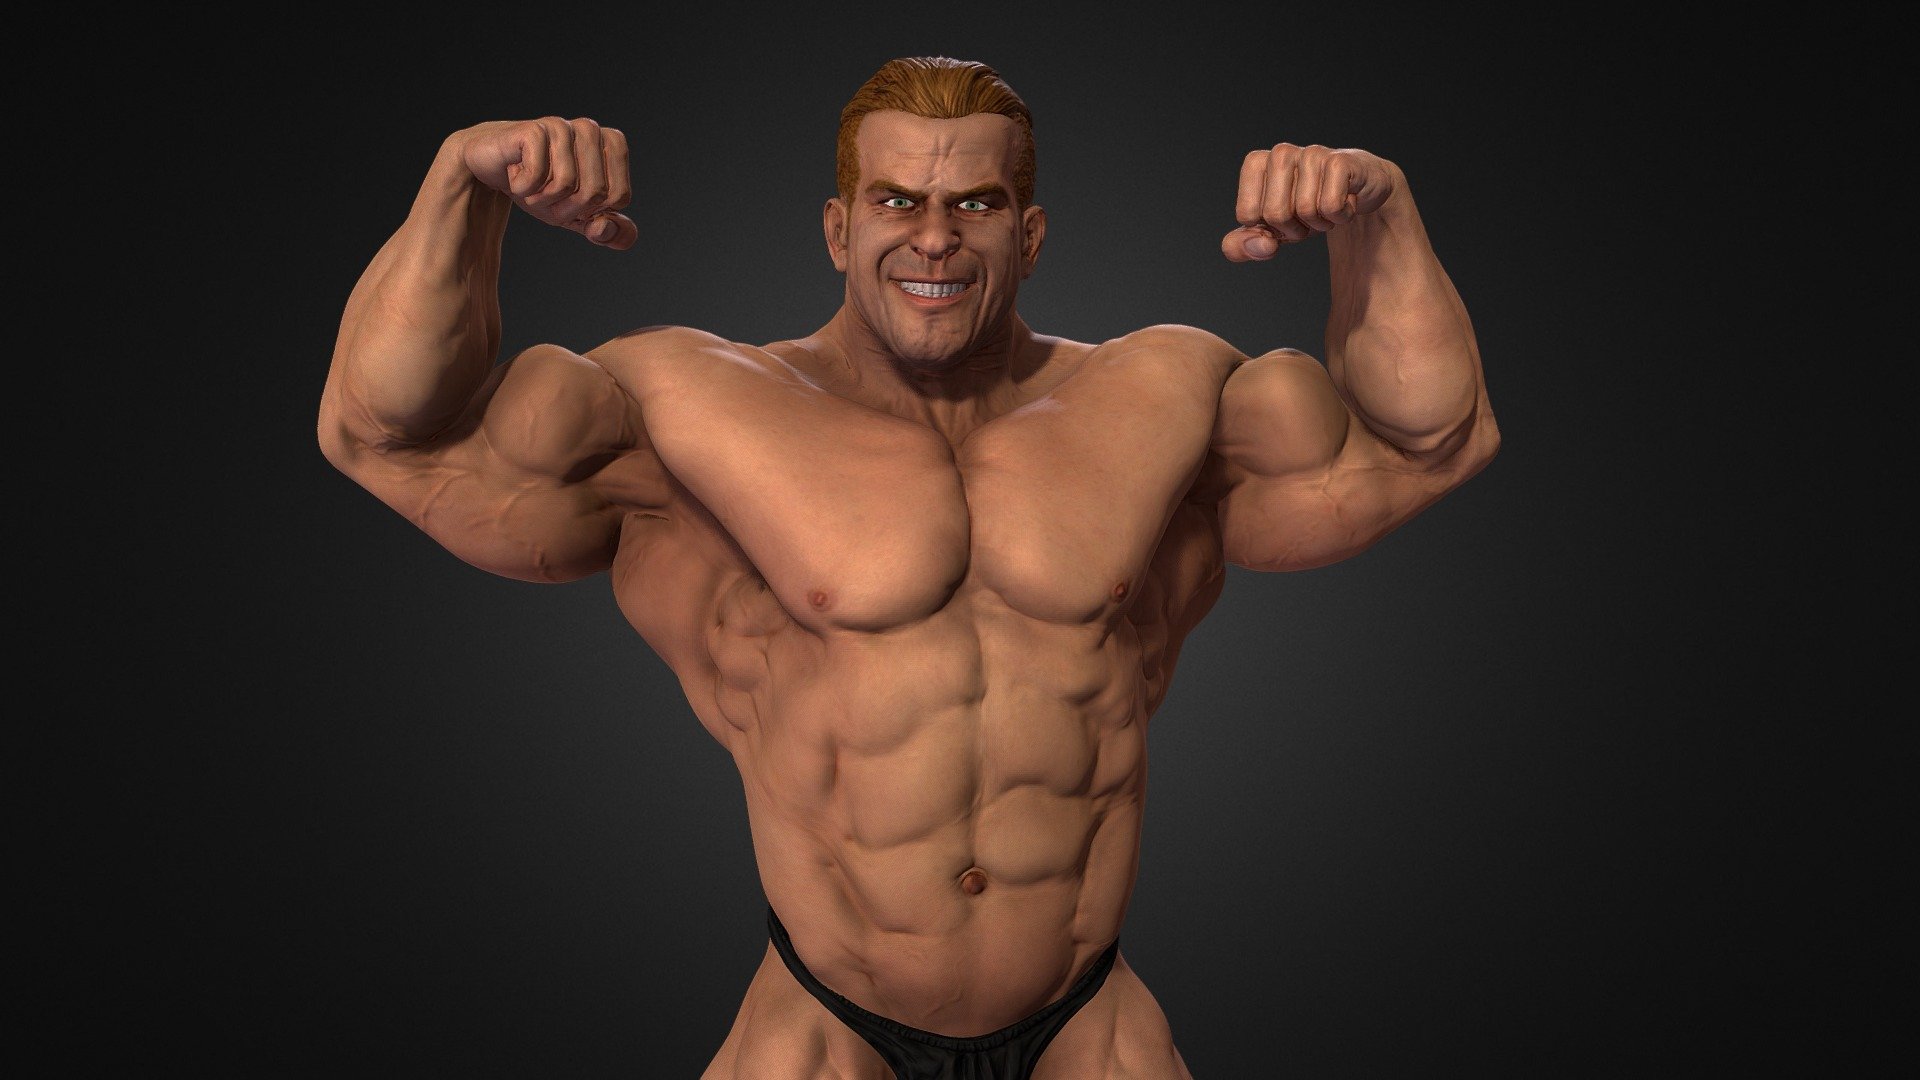 Fan art of my favorite Bodybuilder. I made this in zbrush and Xnormals - 4X Mr. Olympia Jay Cutler - 3D model by BergmannIIpruss 3d model